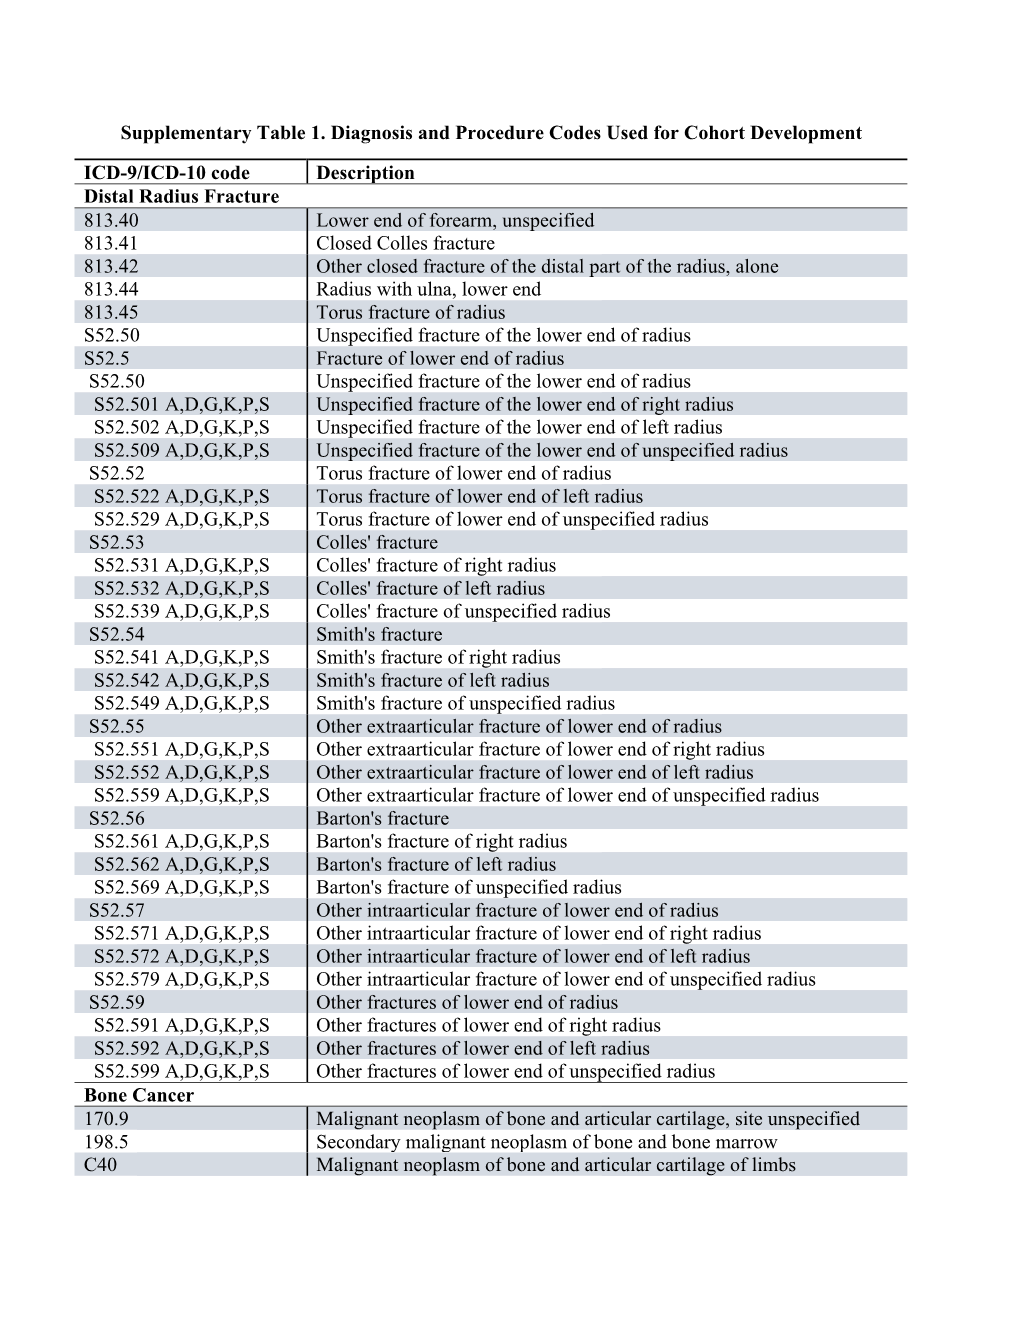 Supplementary Table 1. Diagnosis and Procedure Codes Used For